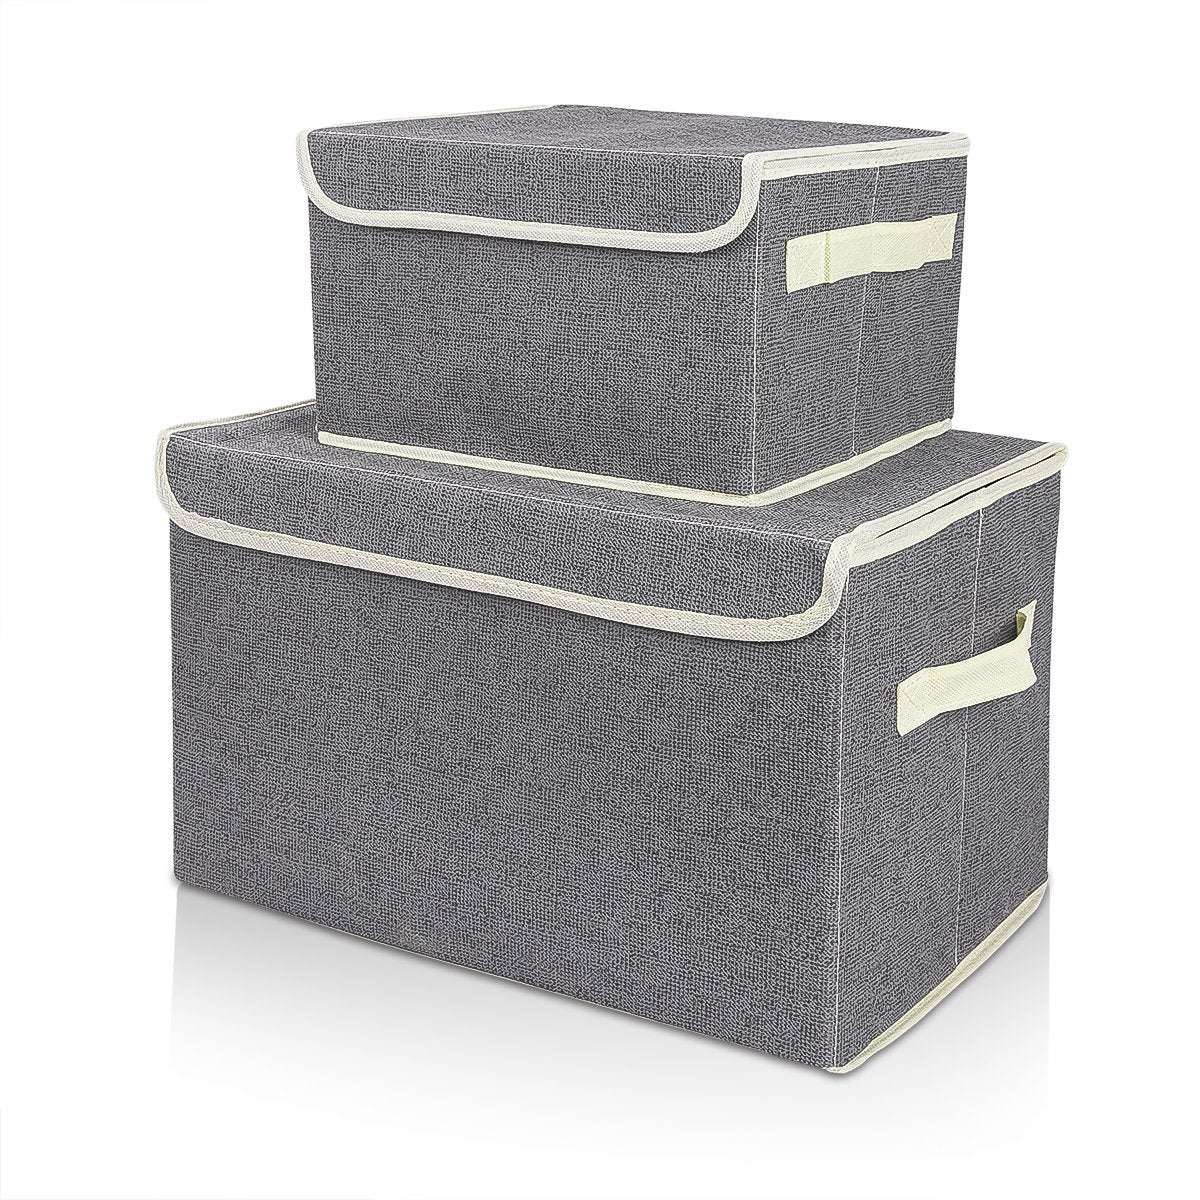 Foldable Storage Bins Cubes Basket with Lid and Dual Handles, Small & Large Storage Box Drawer Fabric Cloth Closet Shelf Nursery Containers Toy Organizer for Home Office Bedroom